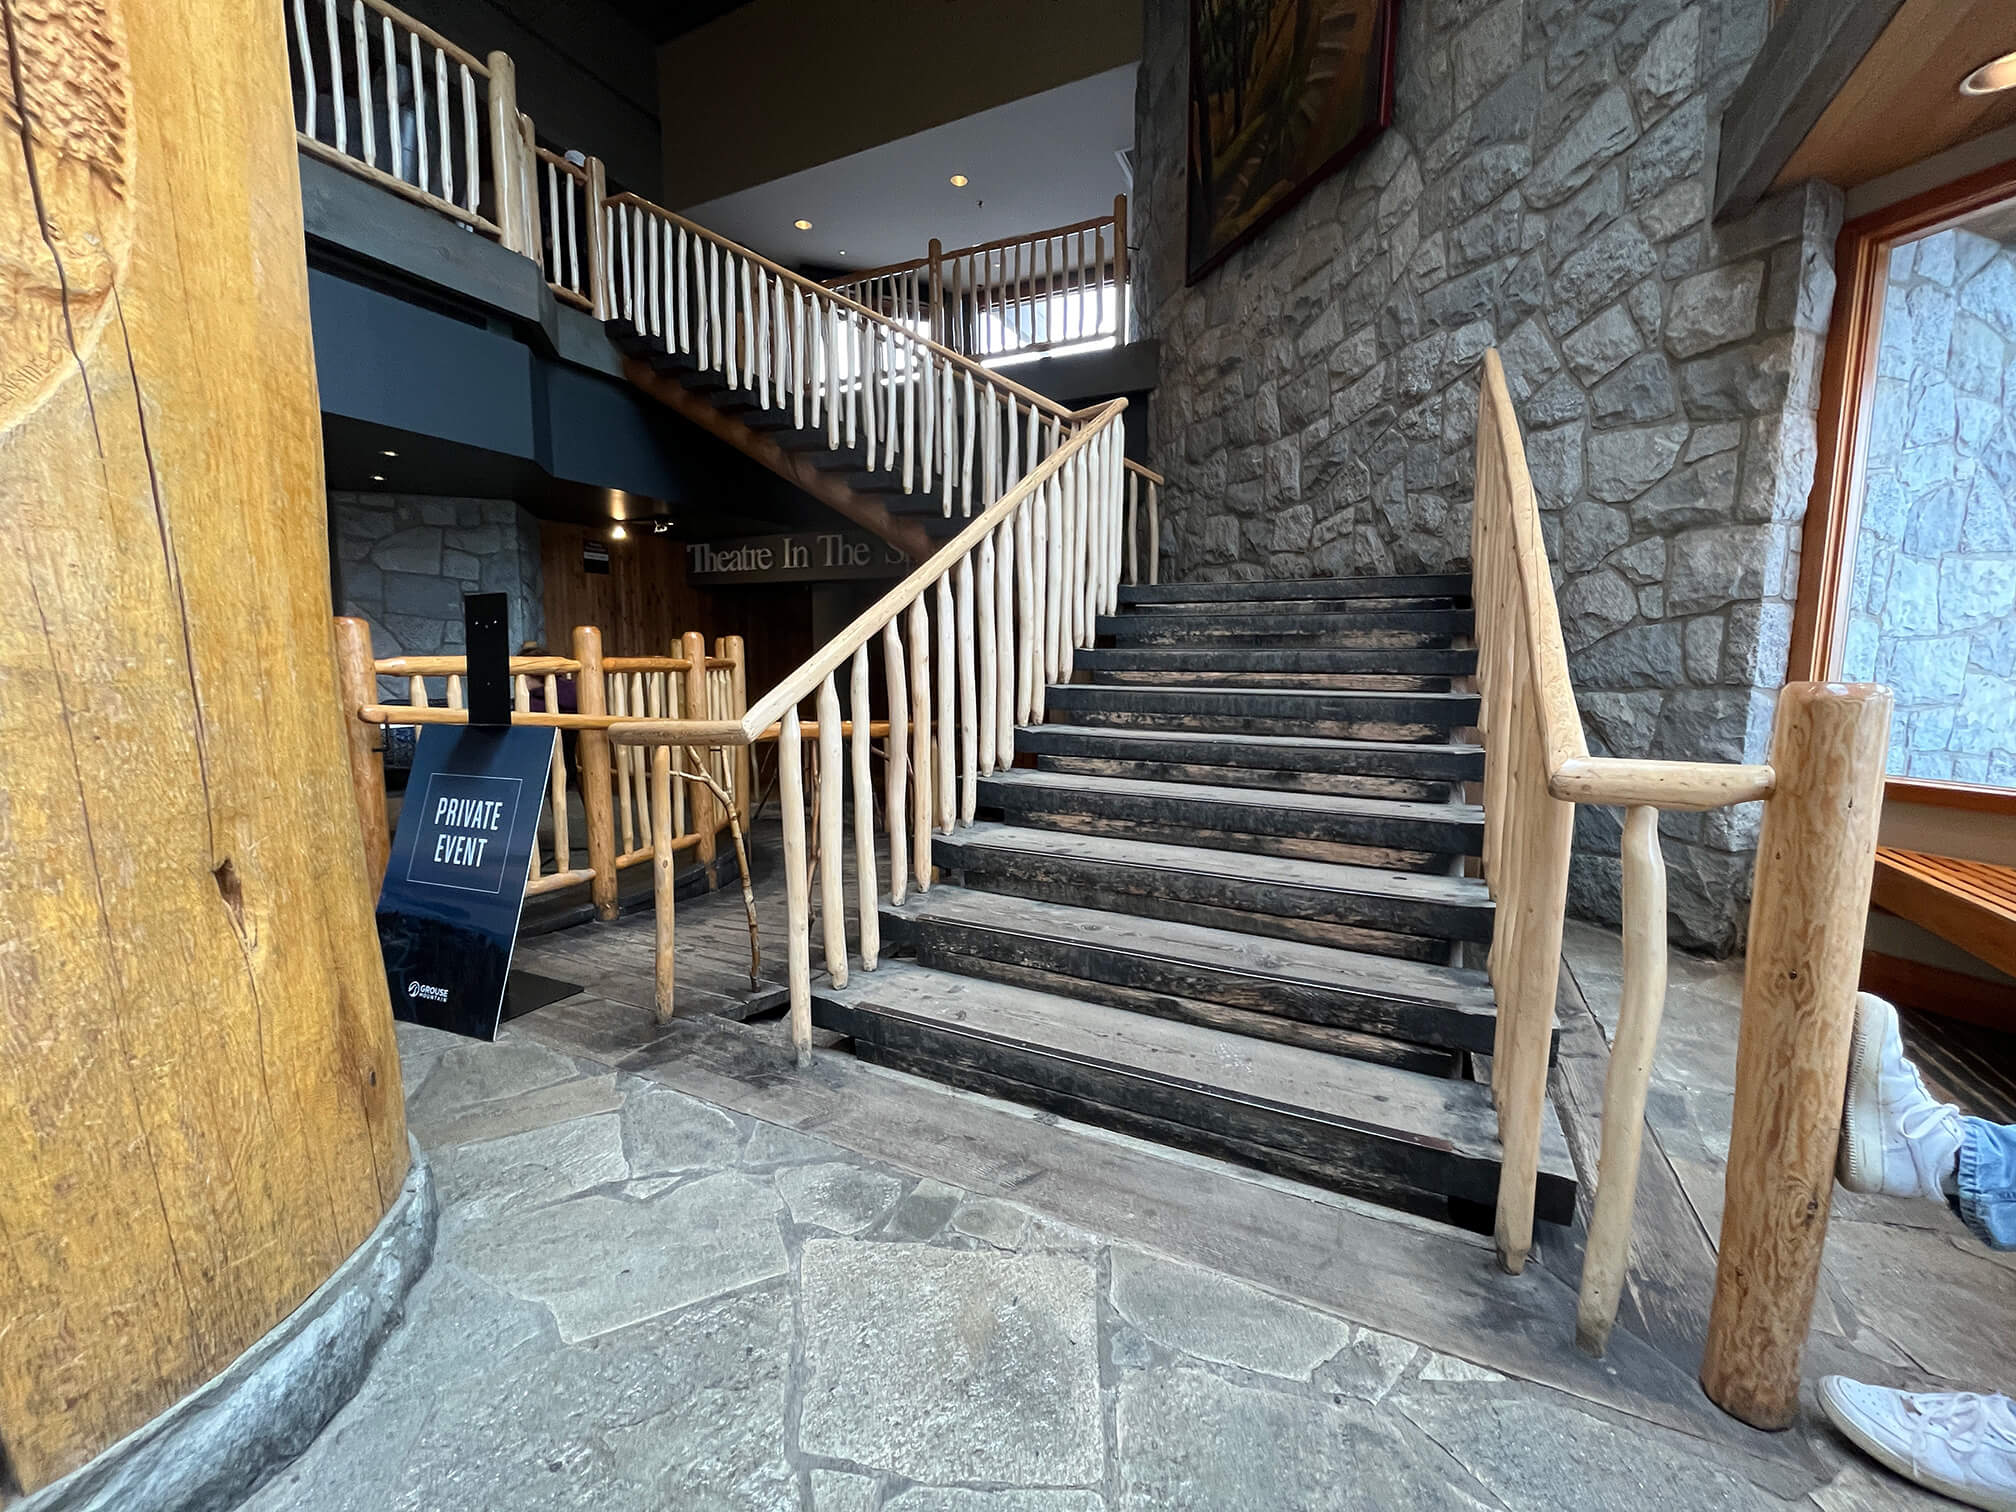 View of the stairs of the lodge, from the bottom.